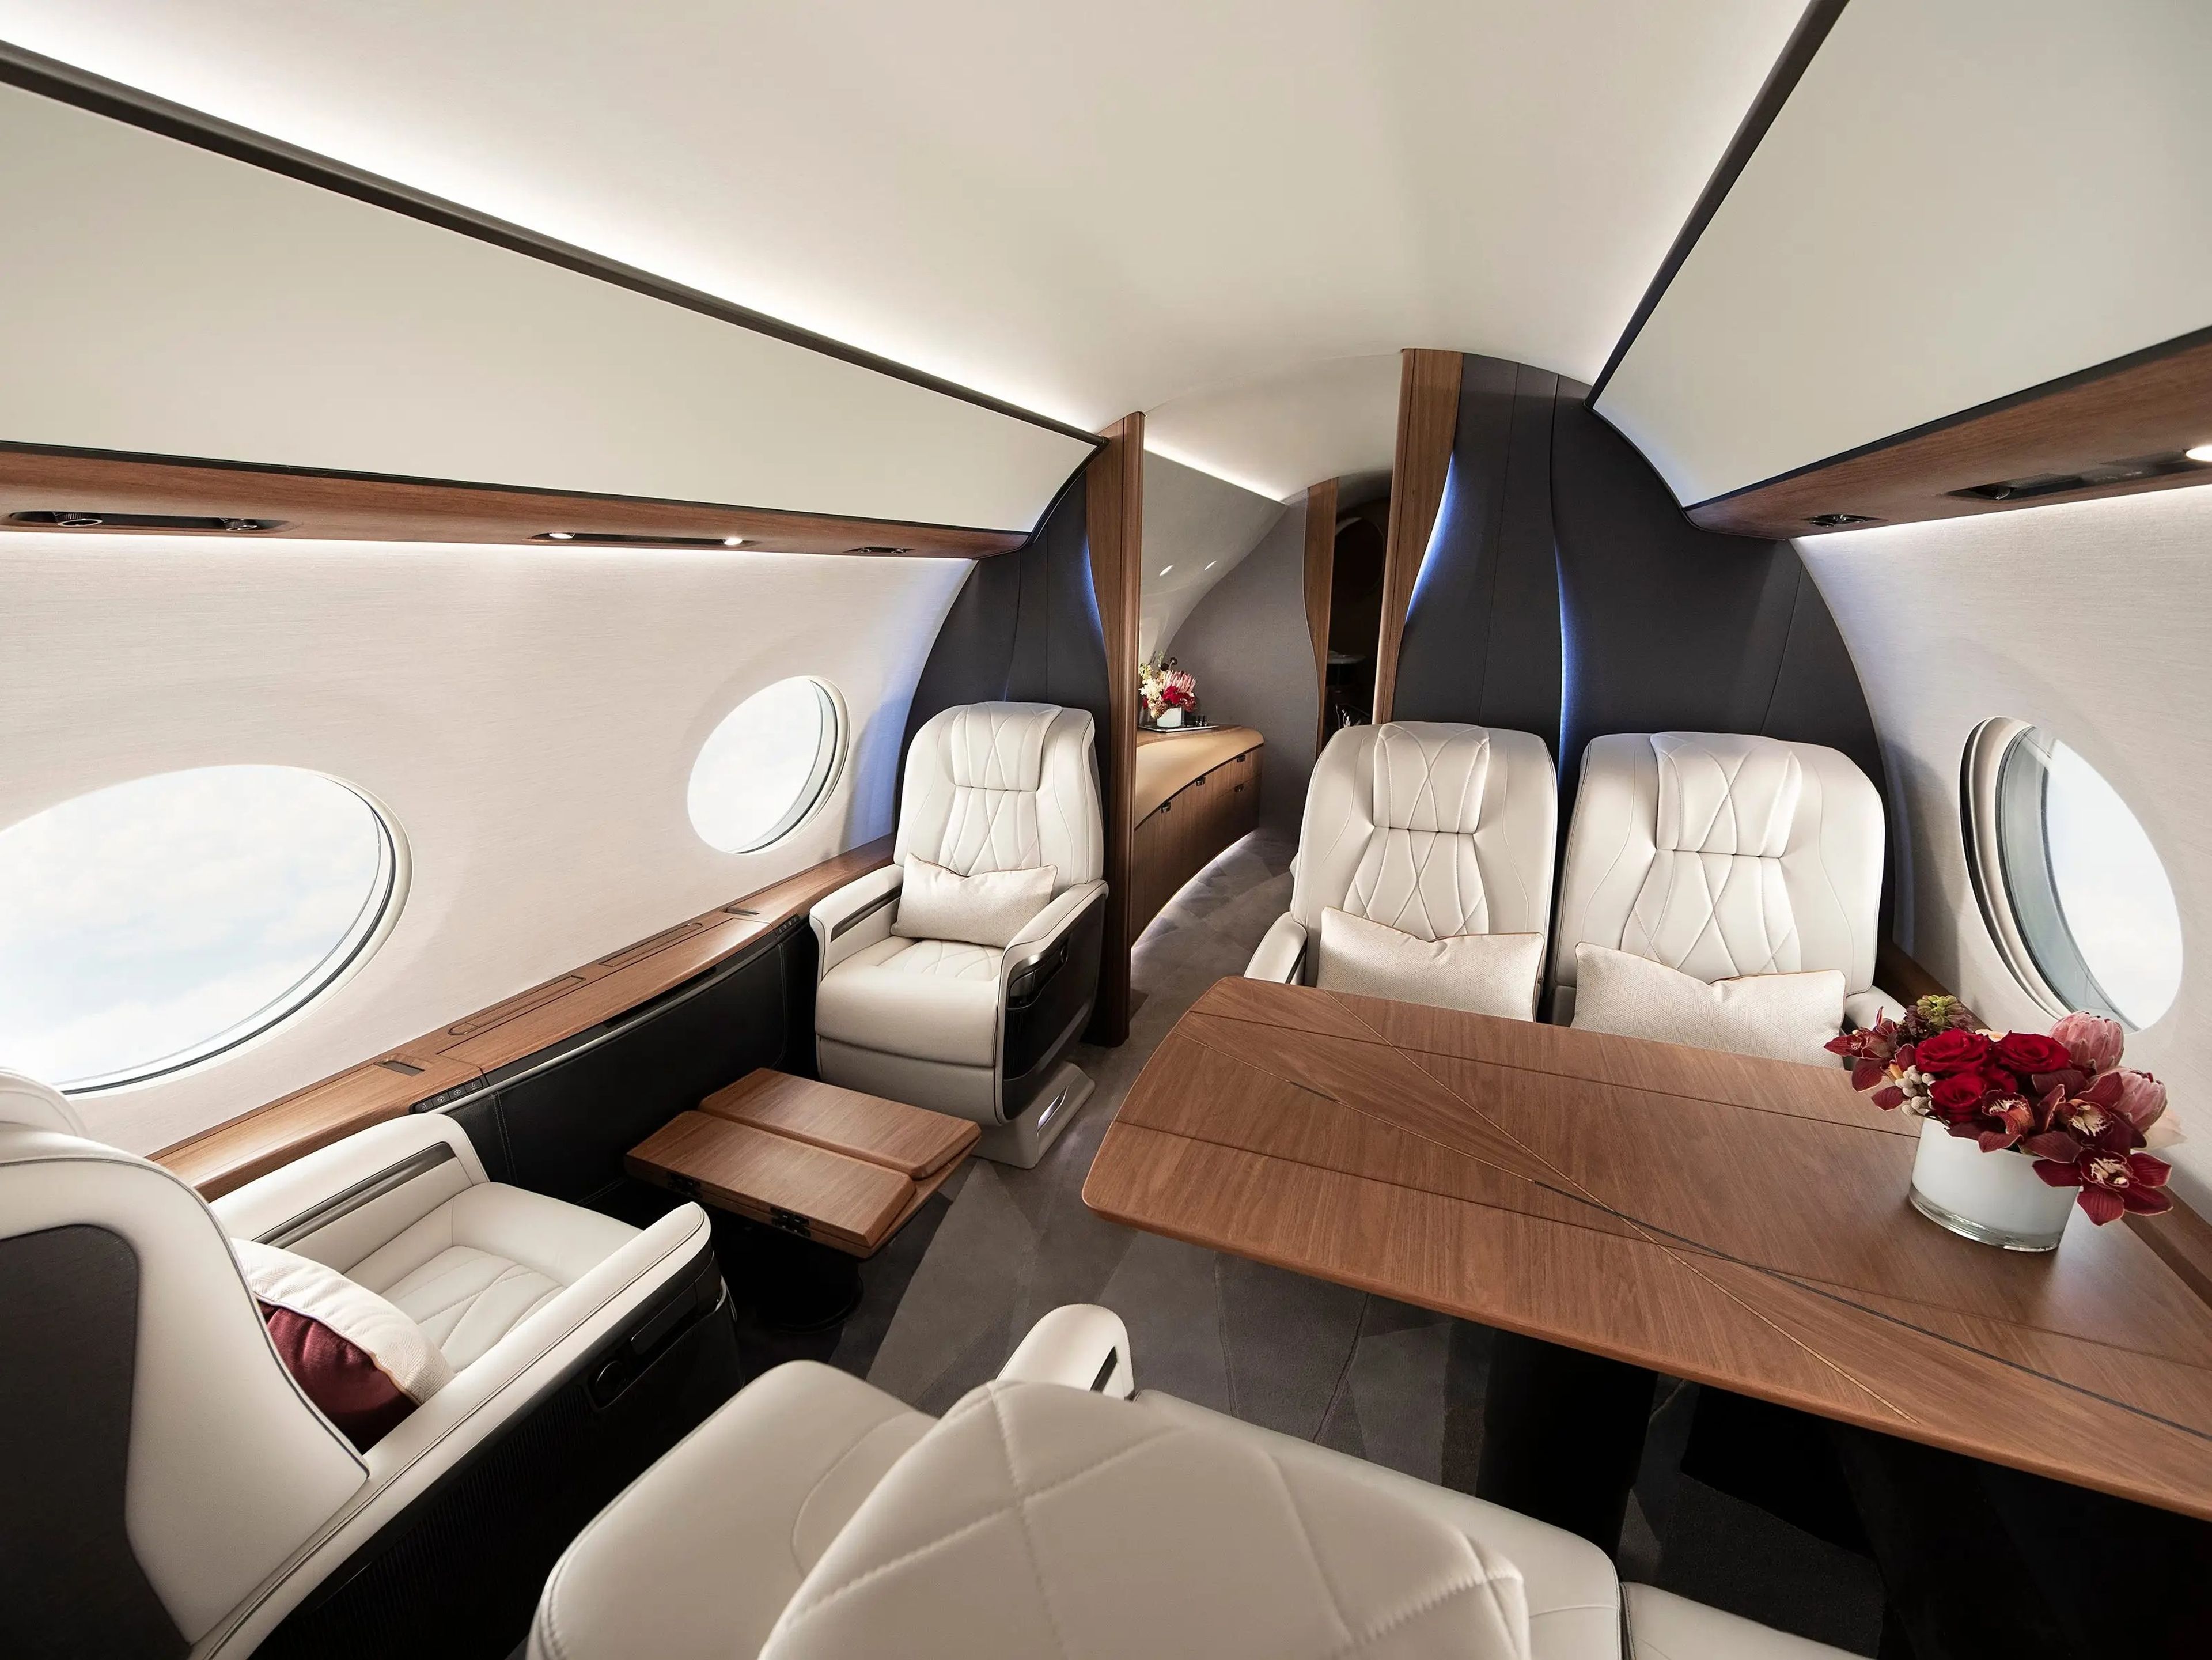 Dining area of the G700.